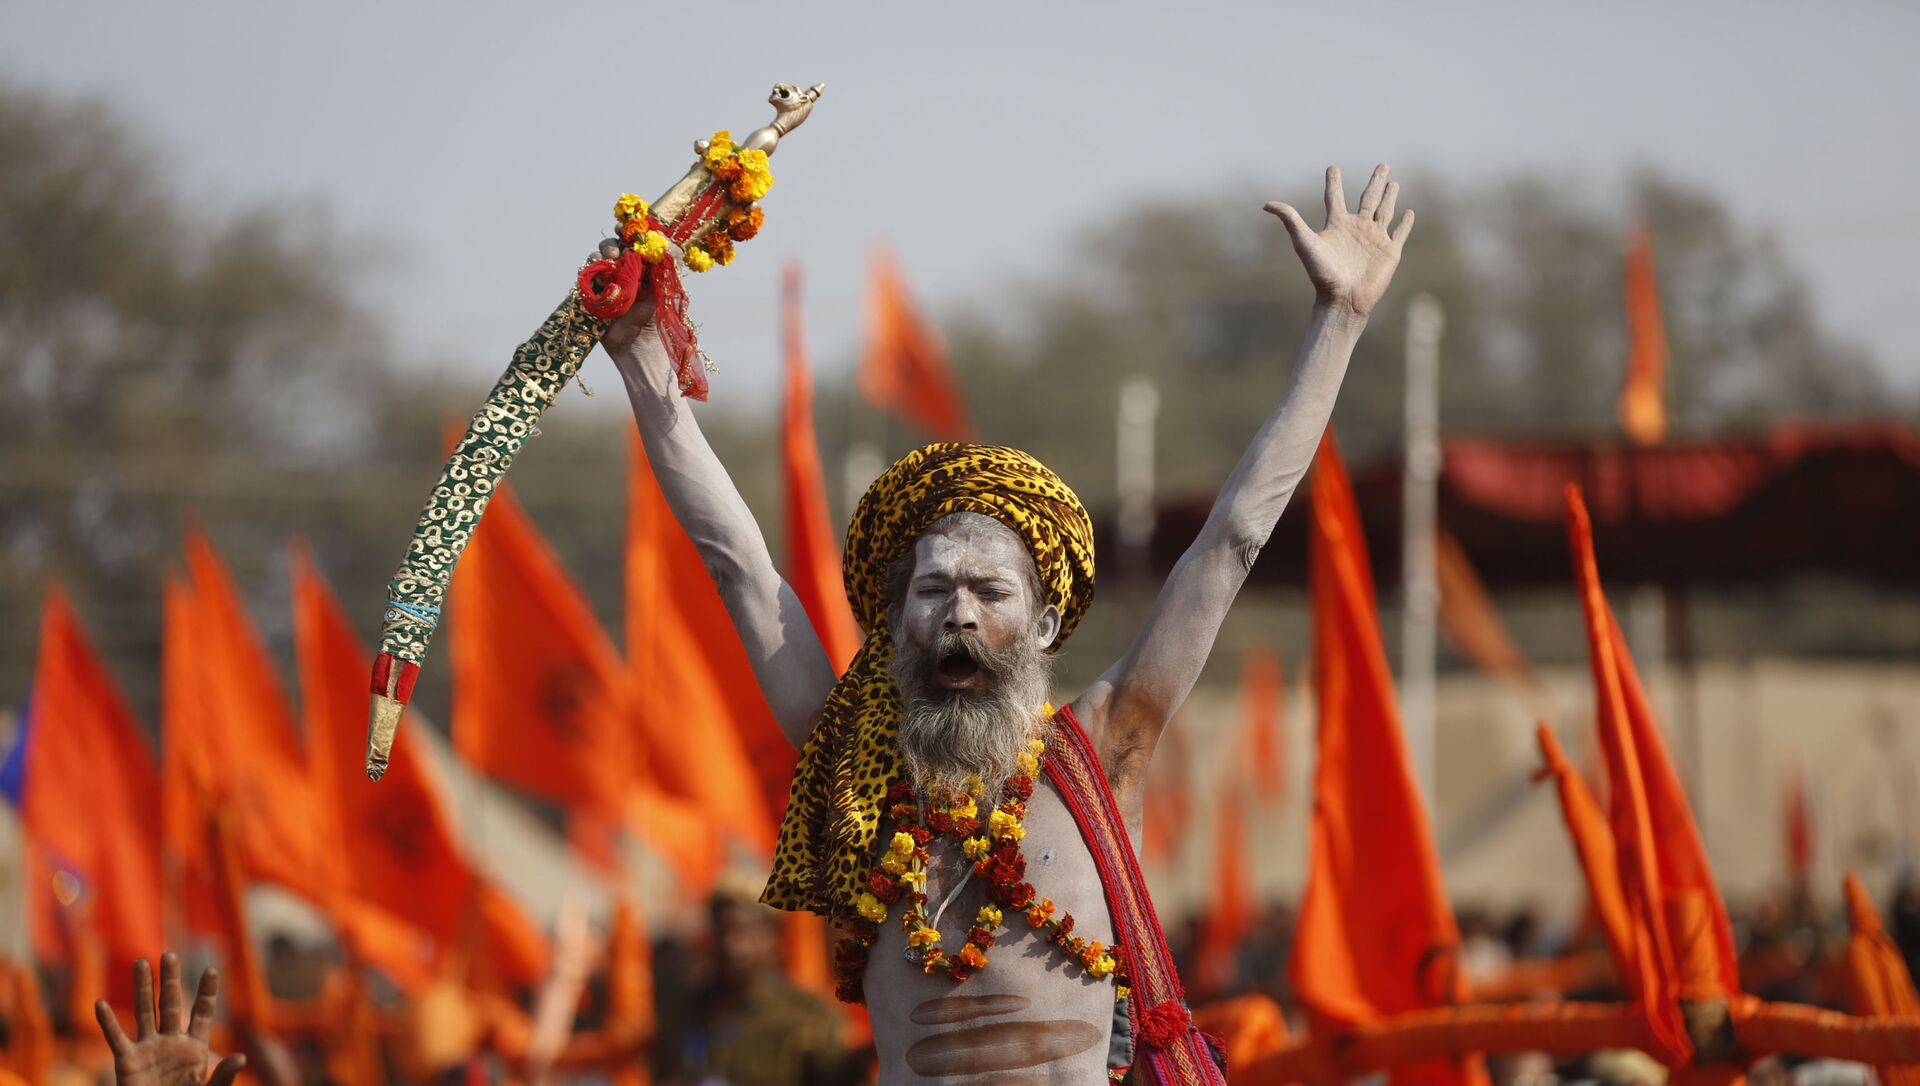 An Indian Hindu holy man shouts slogans during a meeting organized by the Vishva Hindu Parishad or the World Hindu Council at Sangam, the confluence of rivers the Ganges and the Yamuna during the annual Magh Mela festival in Allahabad, India, Friday, Jan. 19, 2018 - Sputnik International, 1920, 12.07.2021